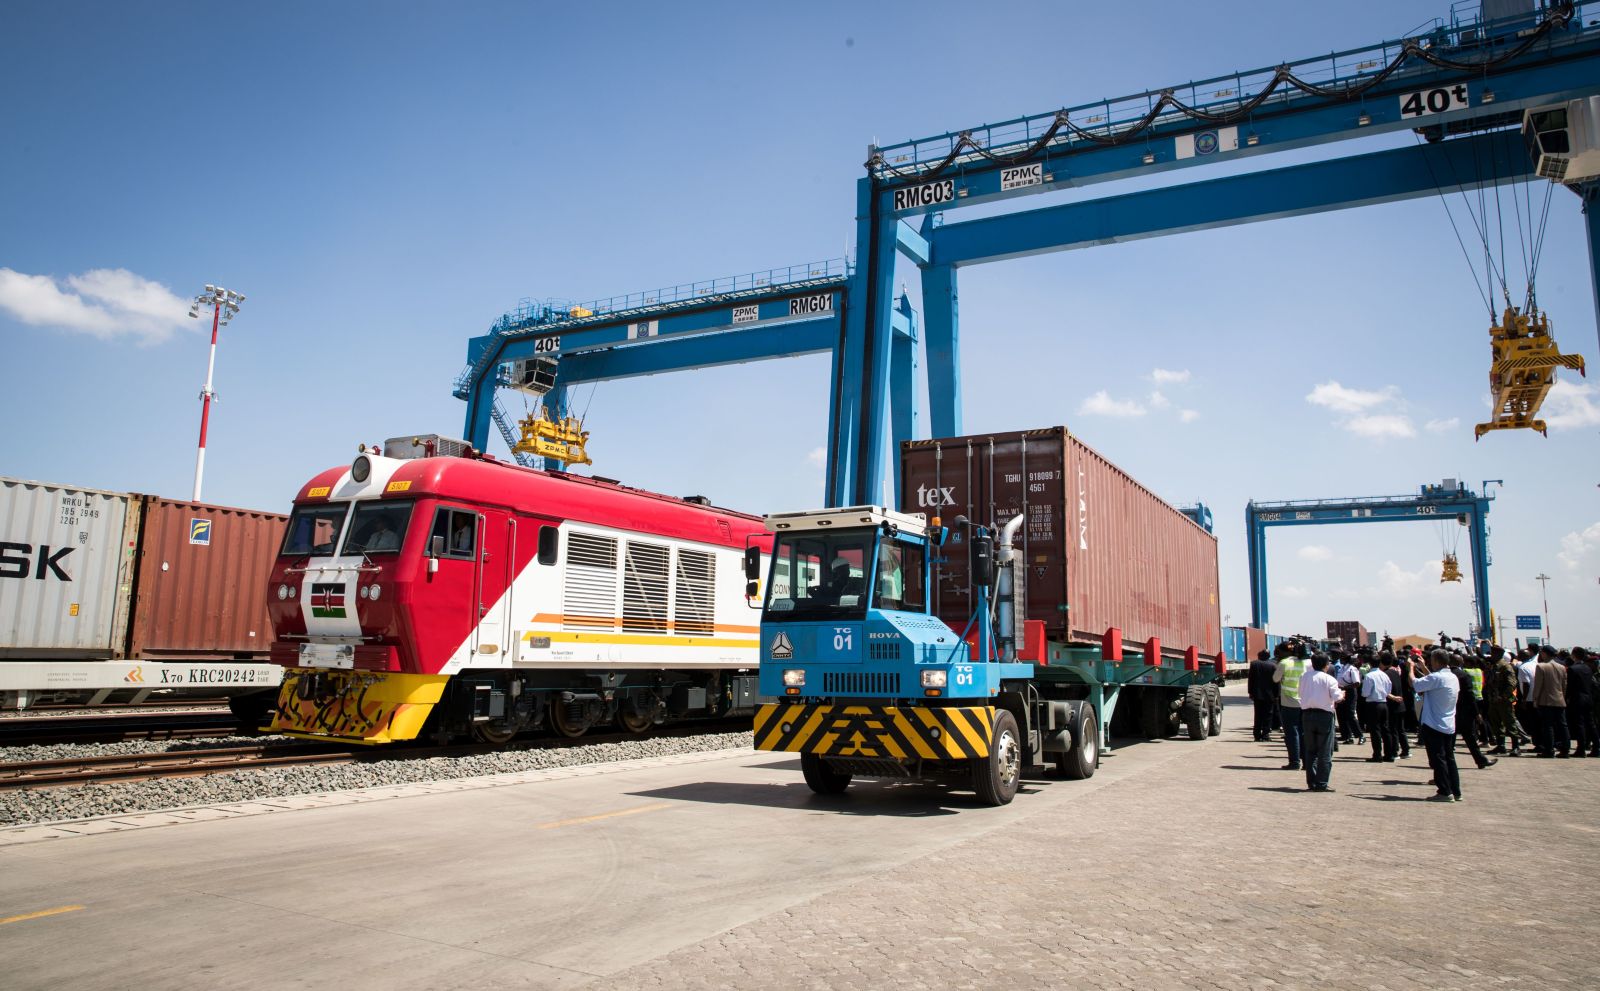 Truck and freight train at Nairobi’s Inland Container Terminal